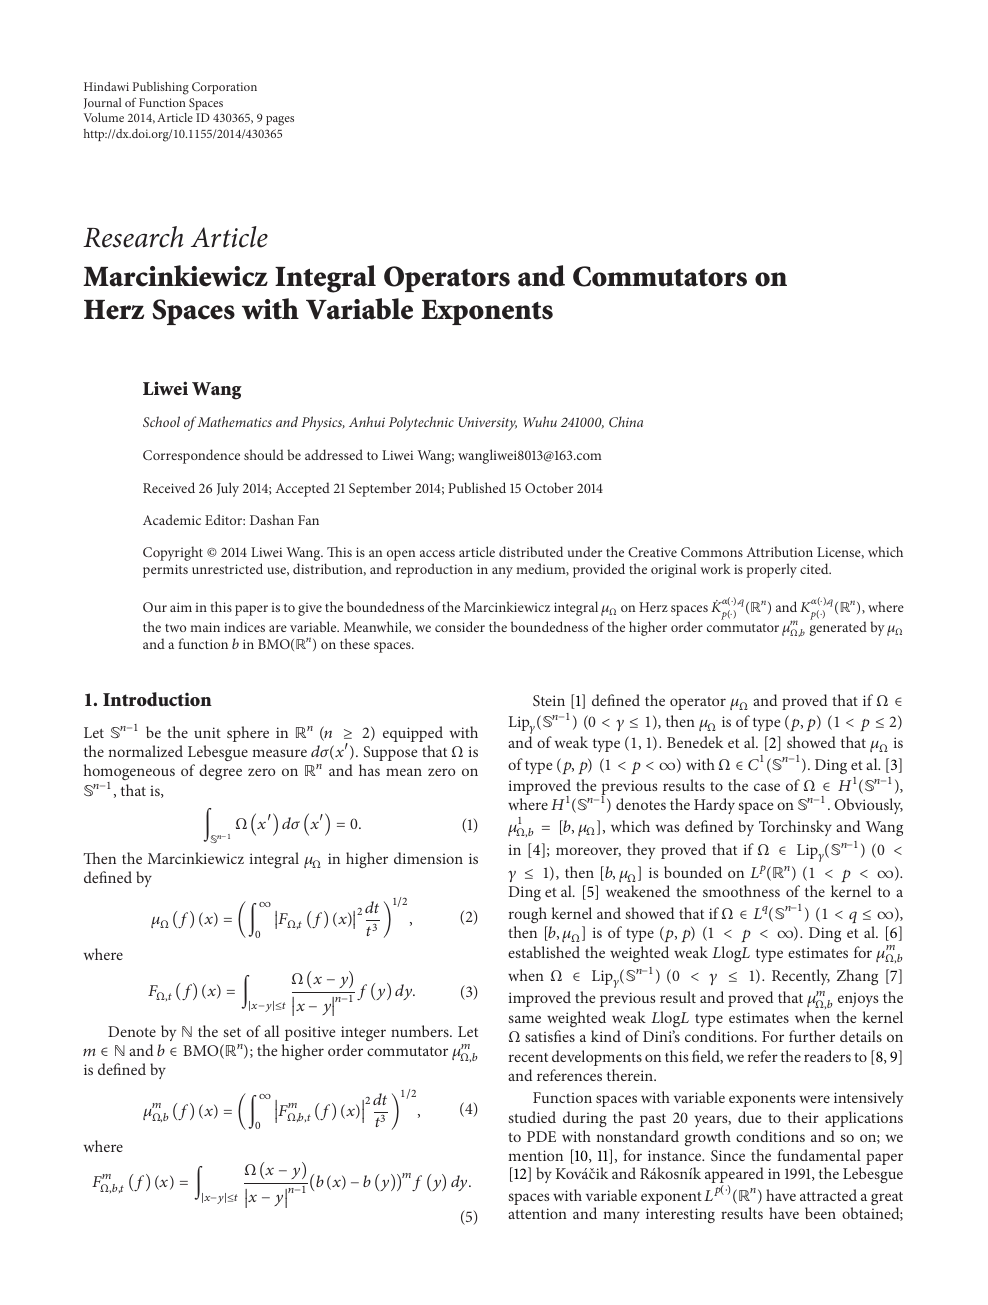 Marcinkiewicz Integral Operators And Commutators On Herz Spaces With Variable Exponents Topic Of Research Paper In Mathematics Download Scholarly Article Pdf And Read For Free On Cyberleninka Open Science Hub